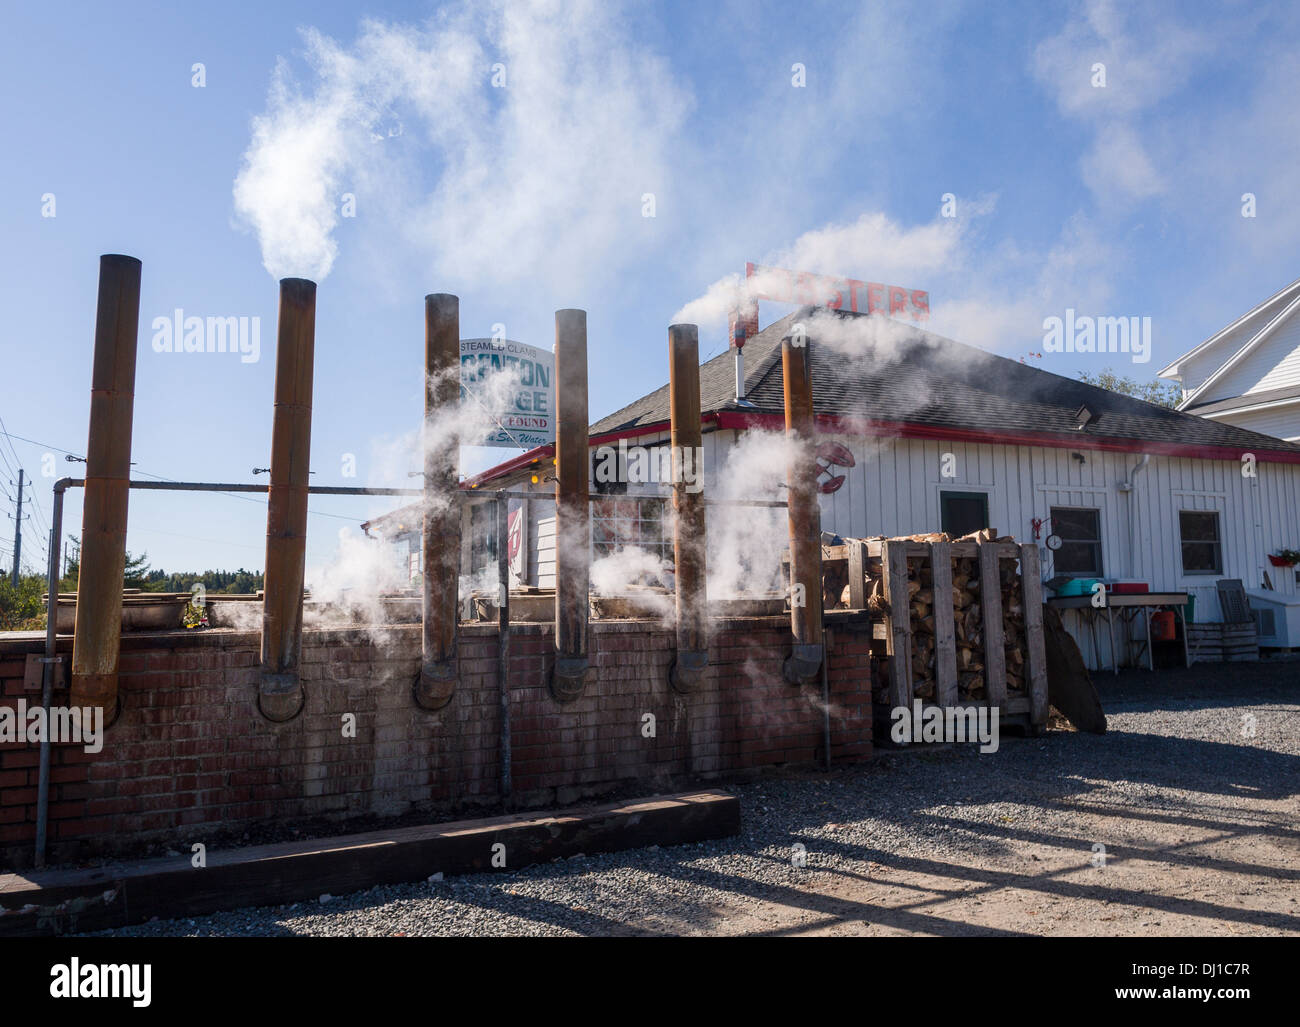 Lobster Pound Outdoor cooking pots. Smoke and steam rise from a row of wood fired lobster cooking pots outside Trenton Bridge Stock Photo